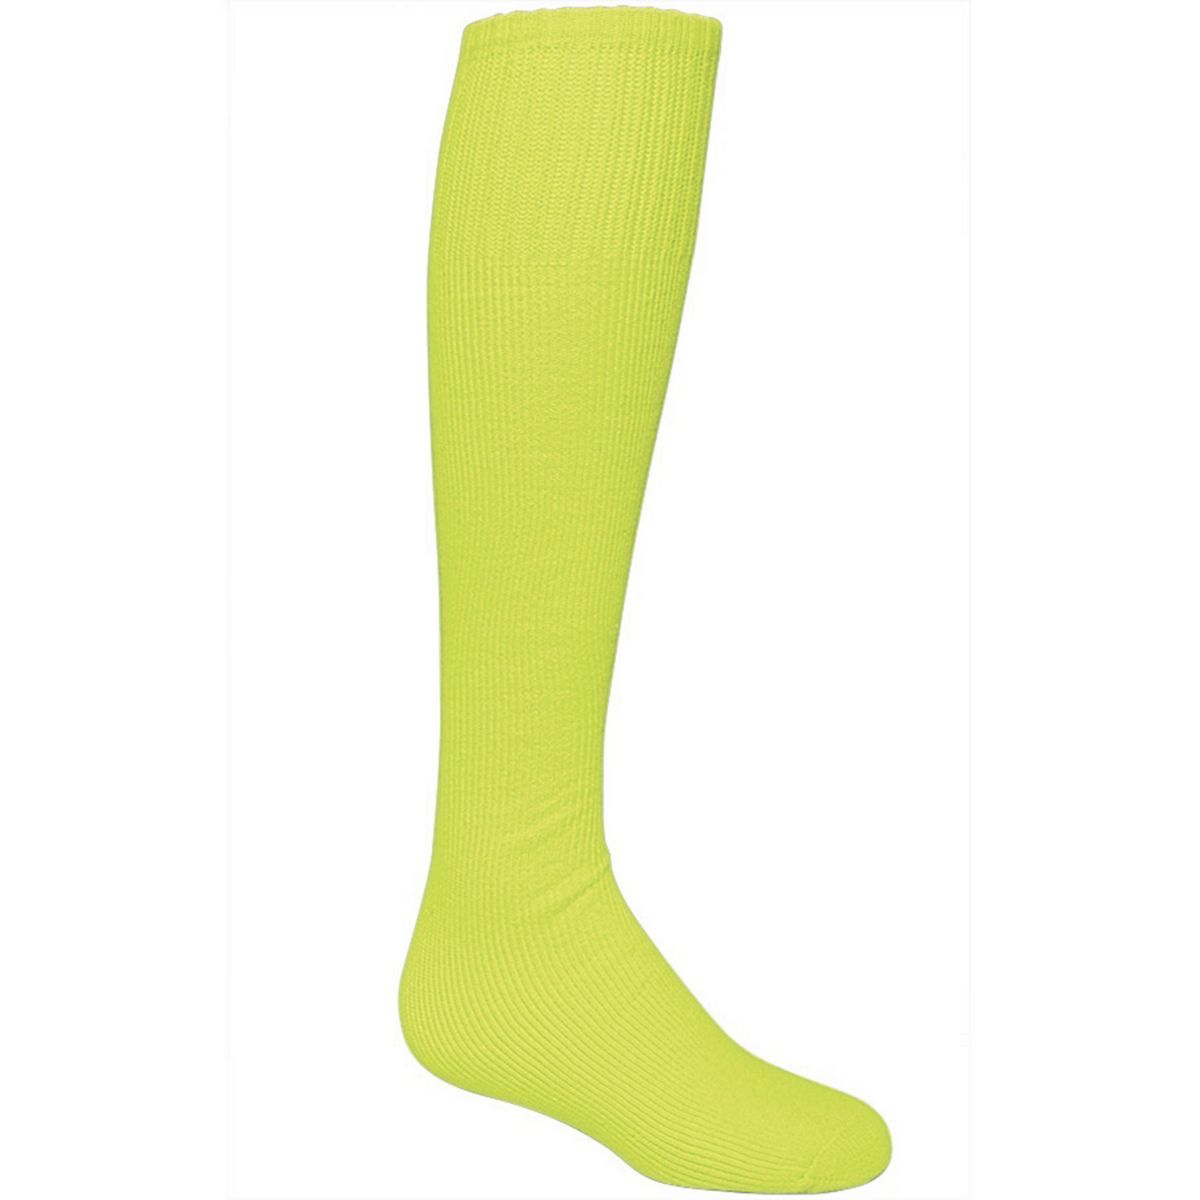 High 5 Athletic  Sock in Lime  -Part of the Accessories, High5-Products, Accessories-Socks product lines at KanaleyCreations.com